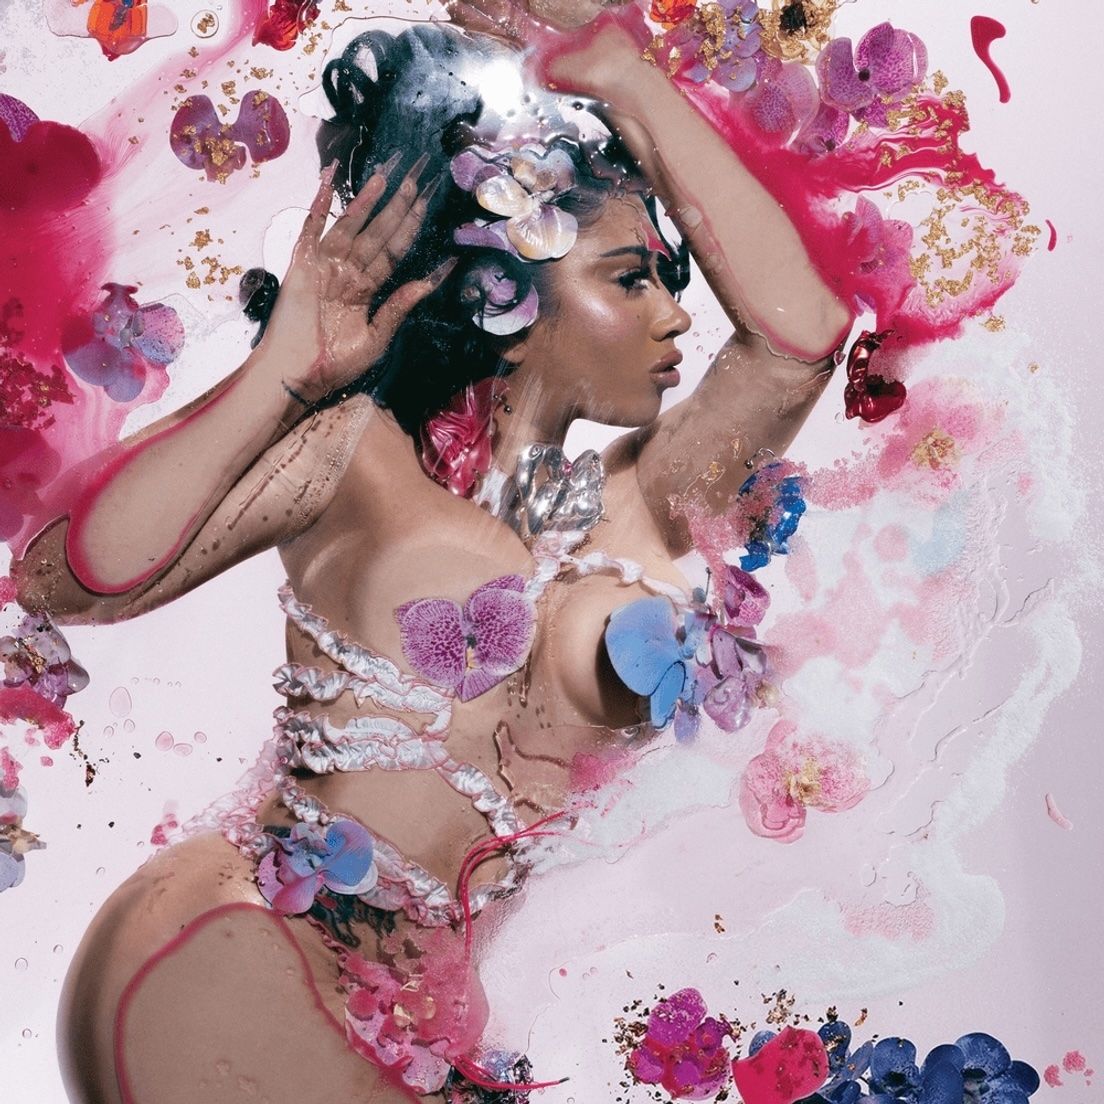 Nicki Minaj in a provocative outfit adorned with flowers in an artistic, abstract setting